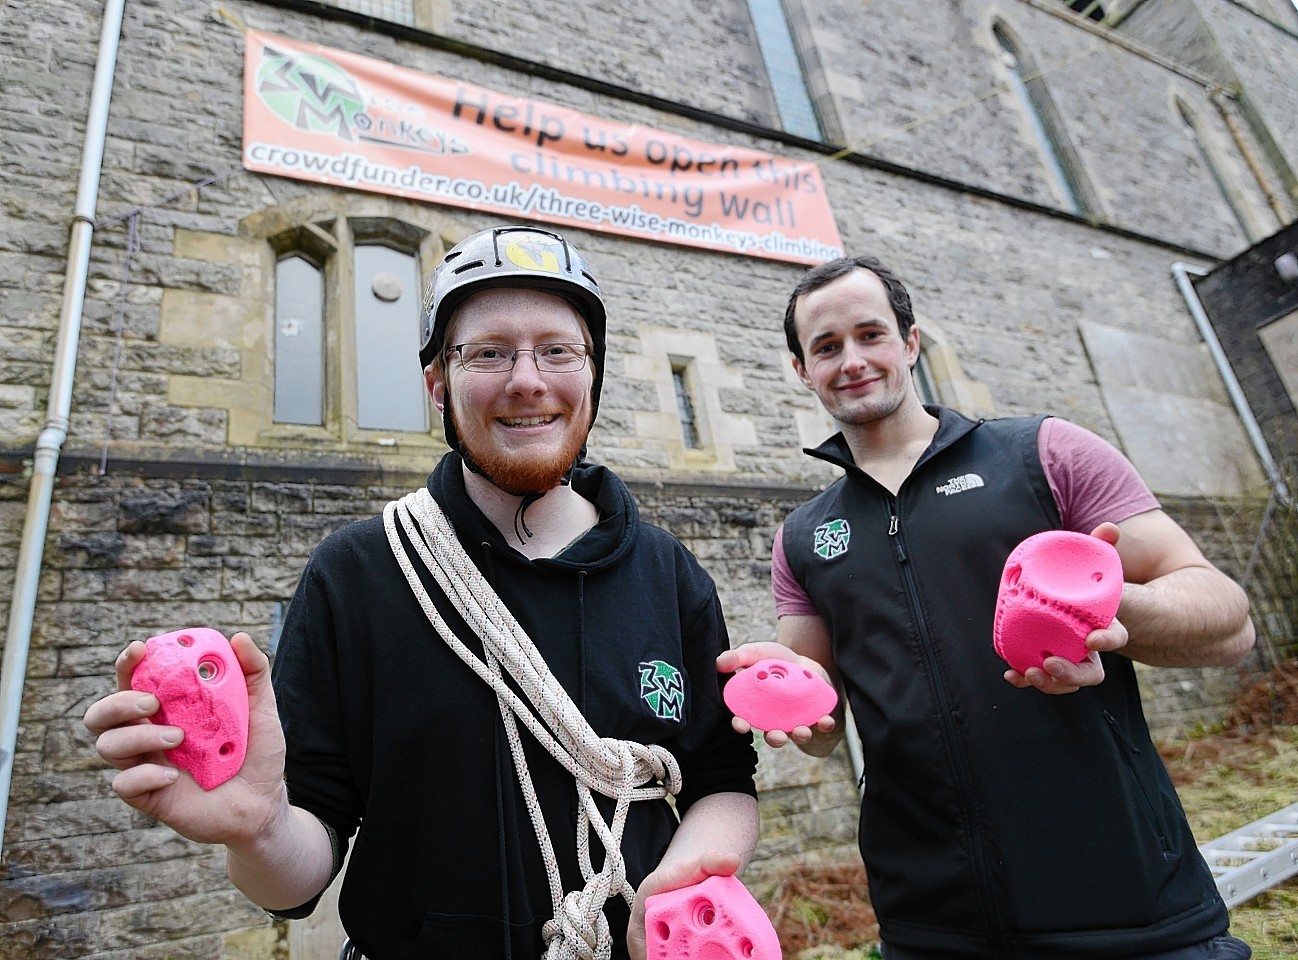 Oliver Millington (left) and Dan Timmis of Three Wise 
Monkeys Climbing at the launch of their crowdfunding initiative